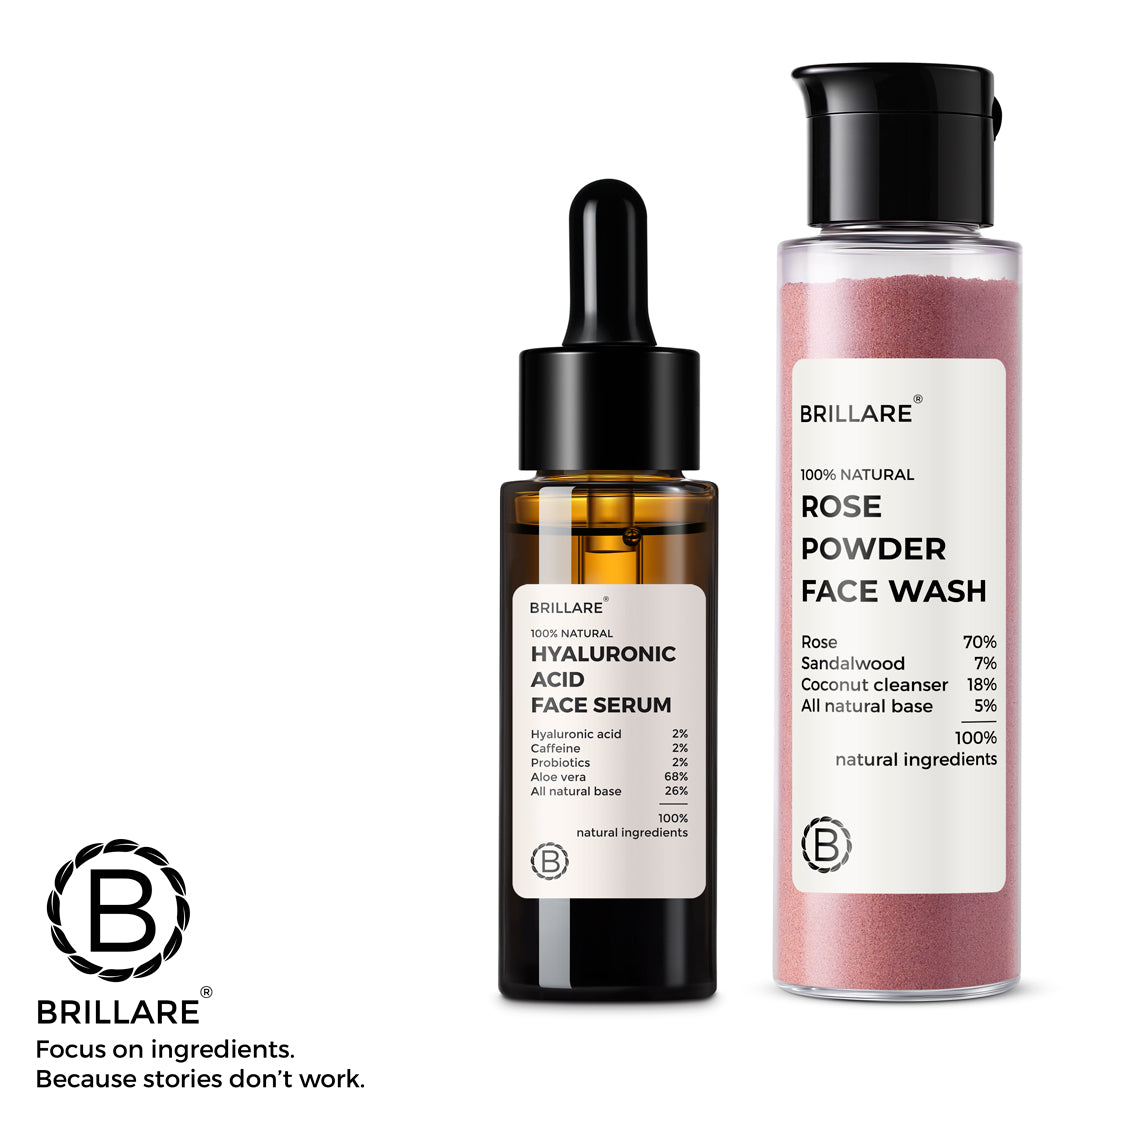 2% Hyaluronic Acid Face Serum & Rose Powder Face Wash (30g) Combo For Ageing Skin